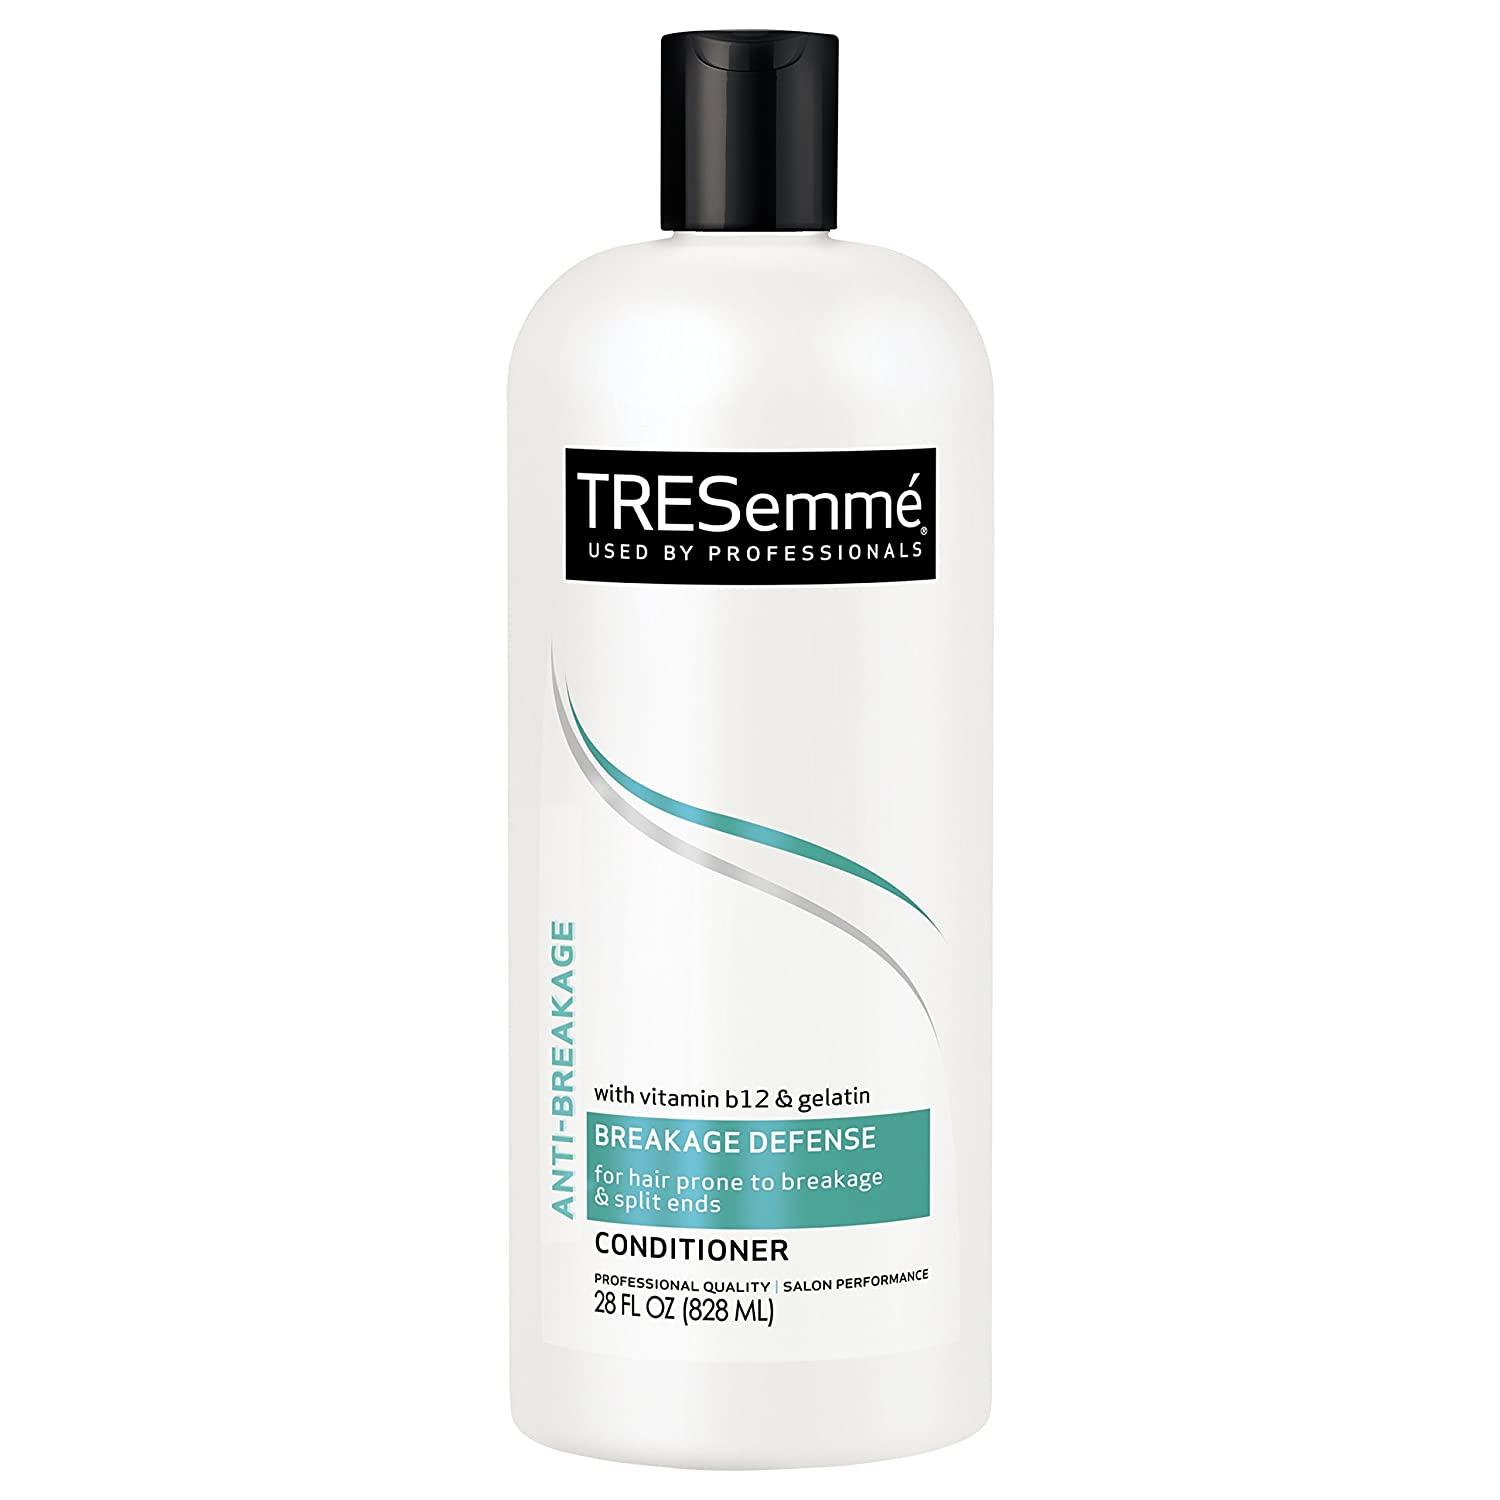 TRESemme Anti-Breakage Conditioner for $2.55 Shipped